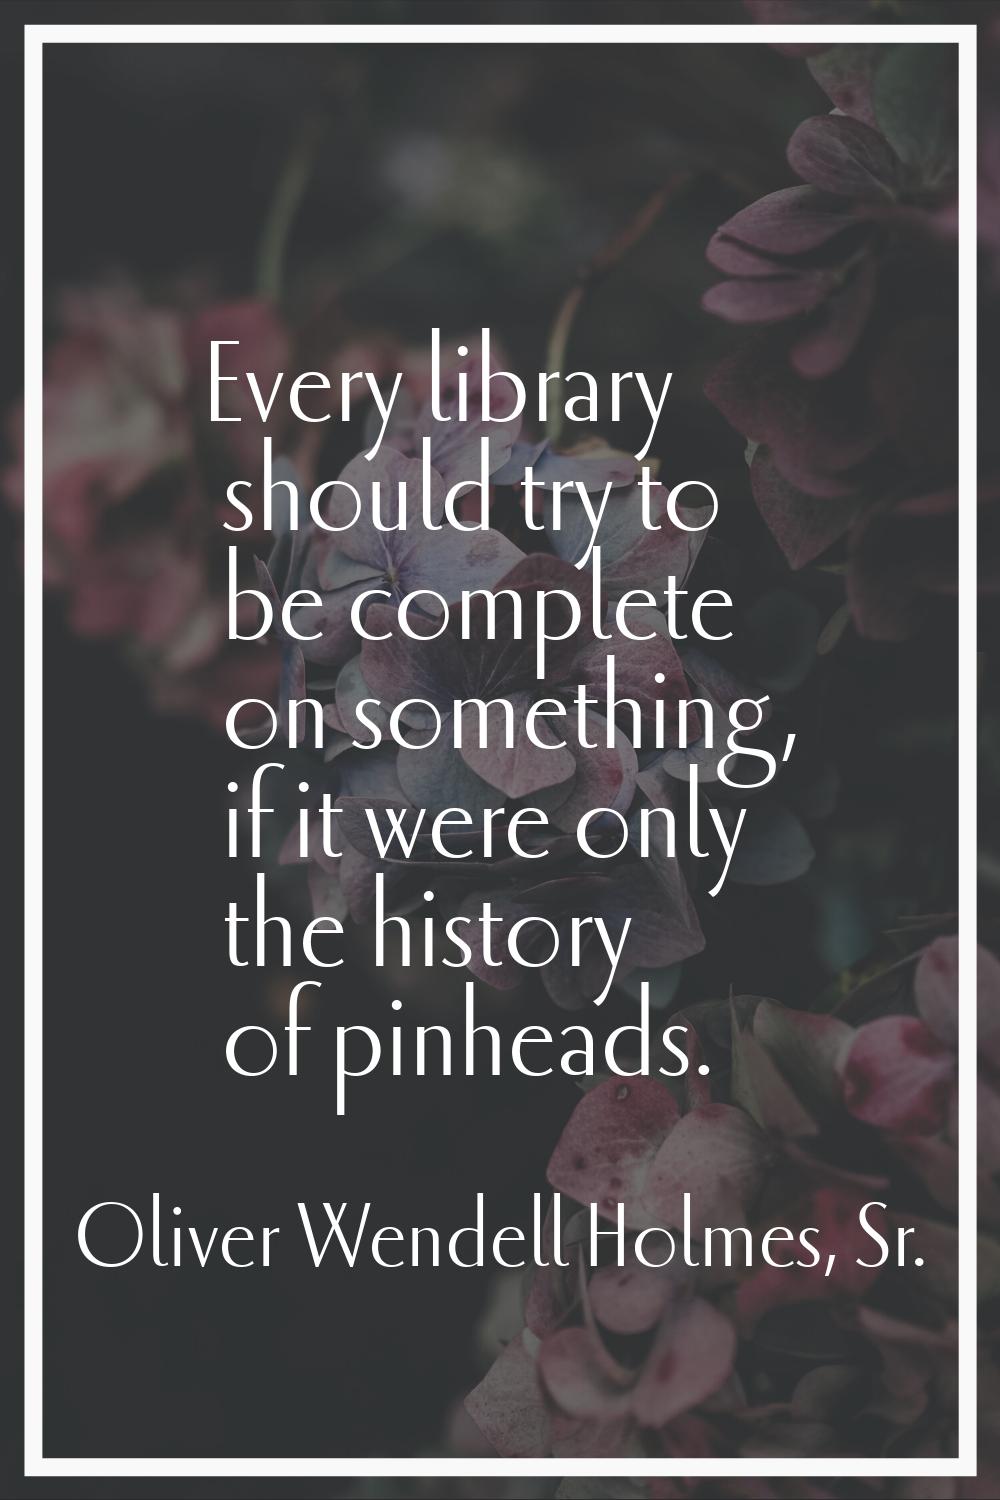 Every library should try to be complete on something, if it were only the history of pinheads.